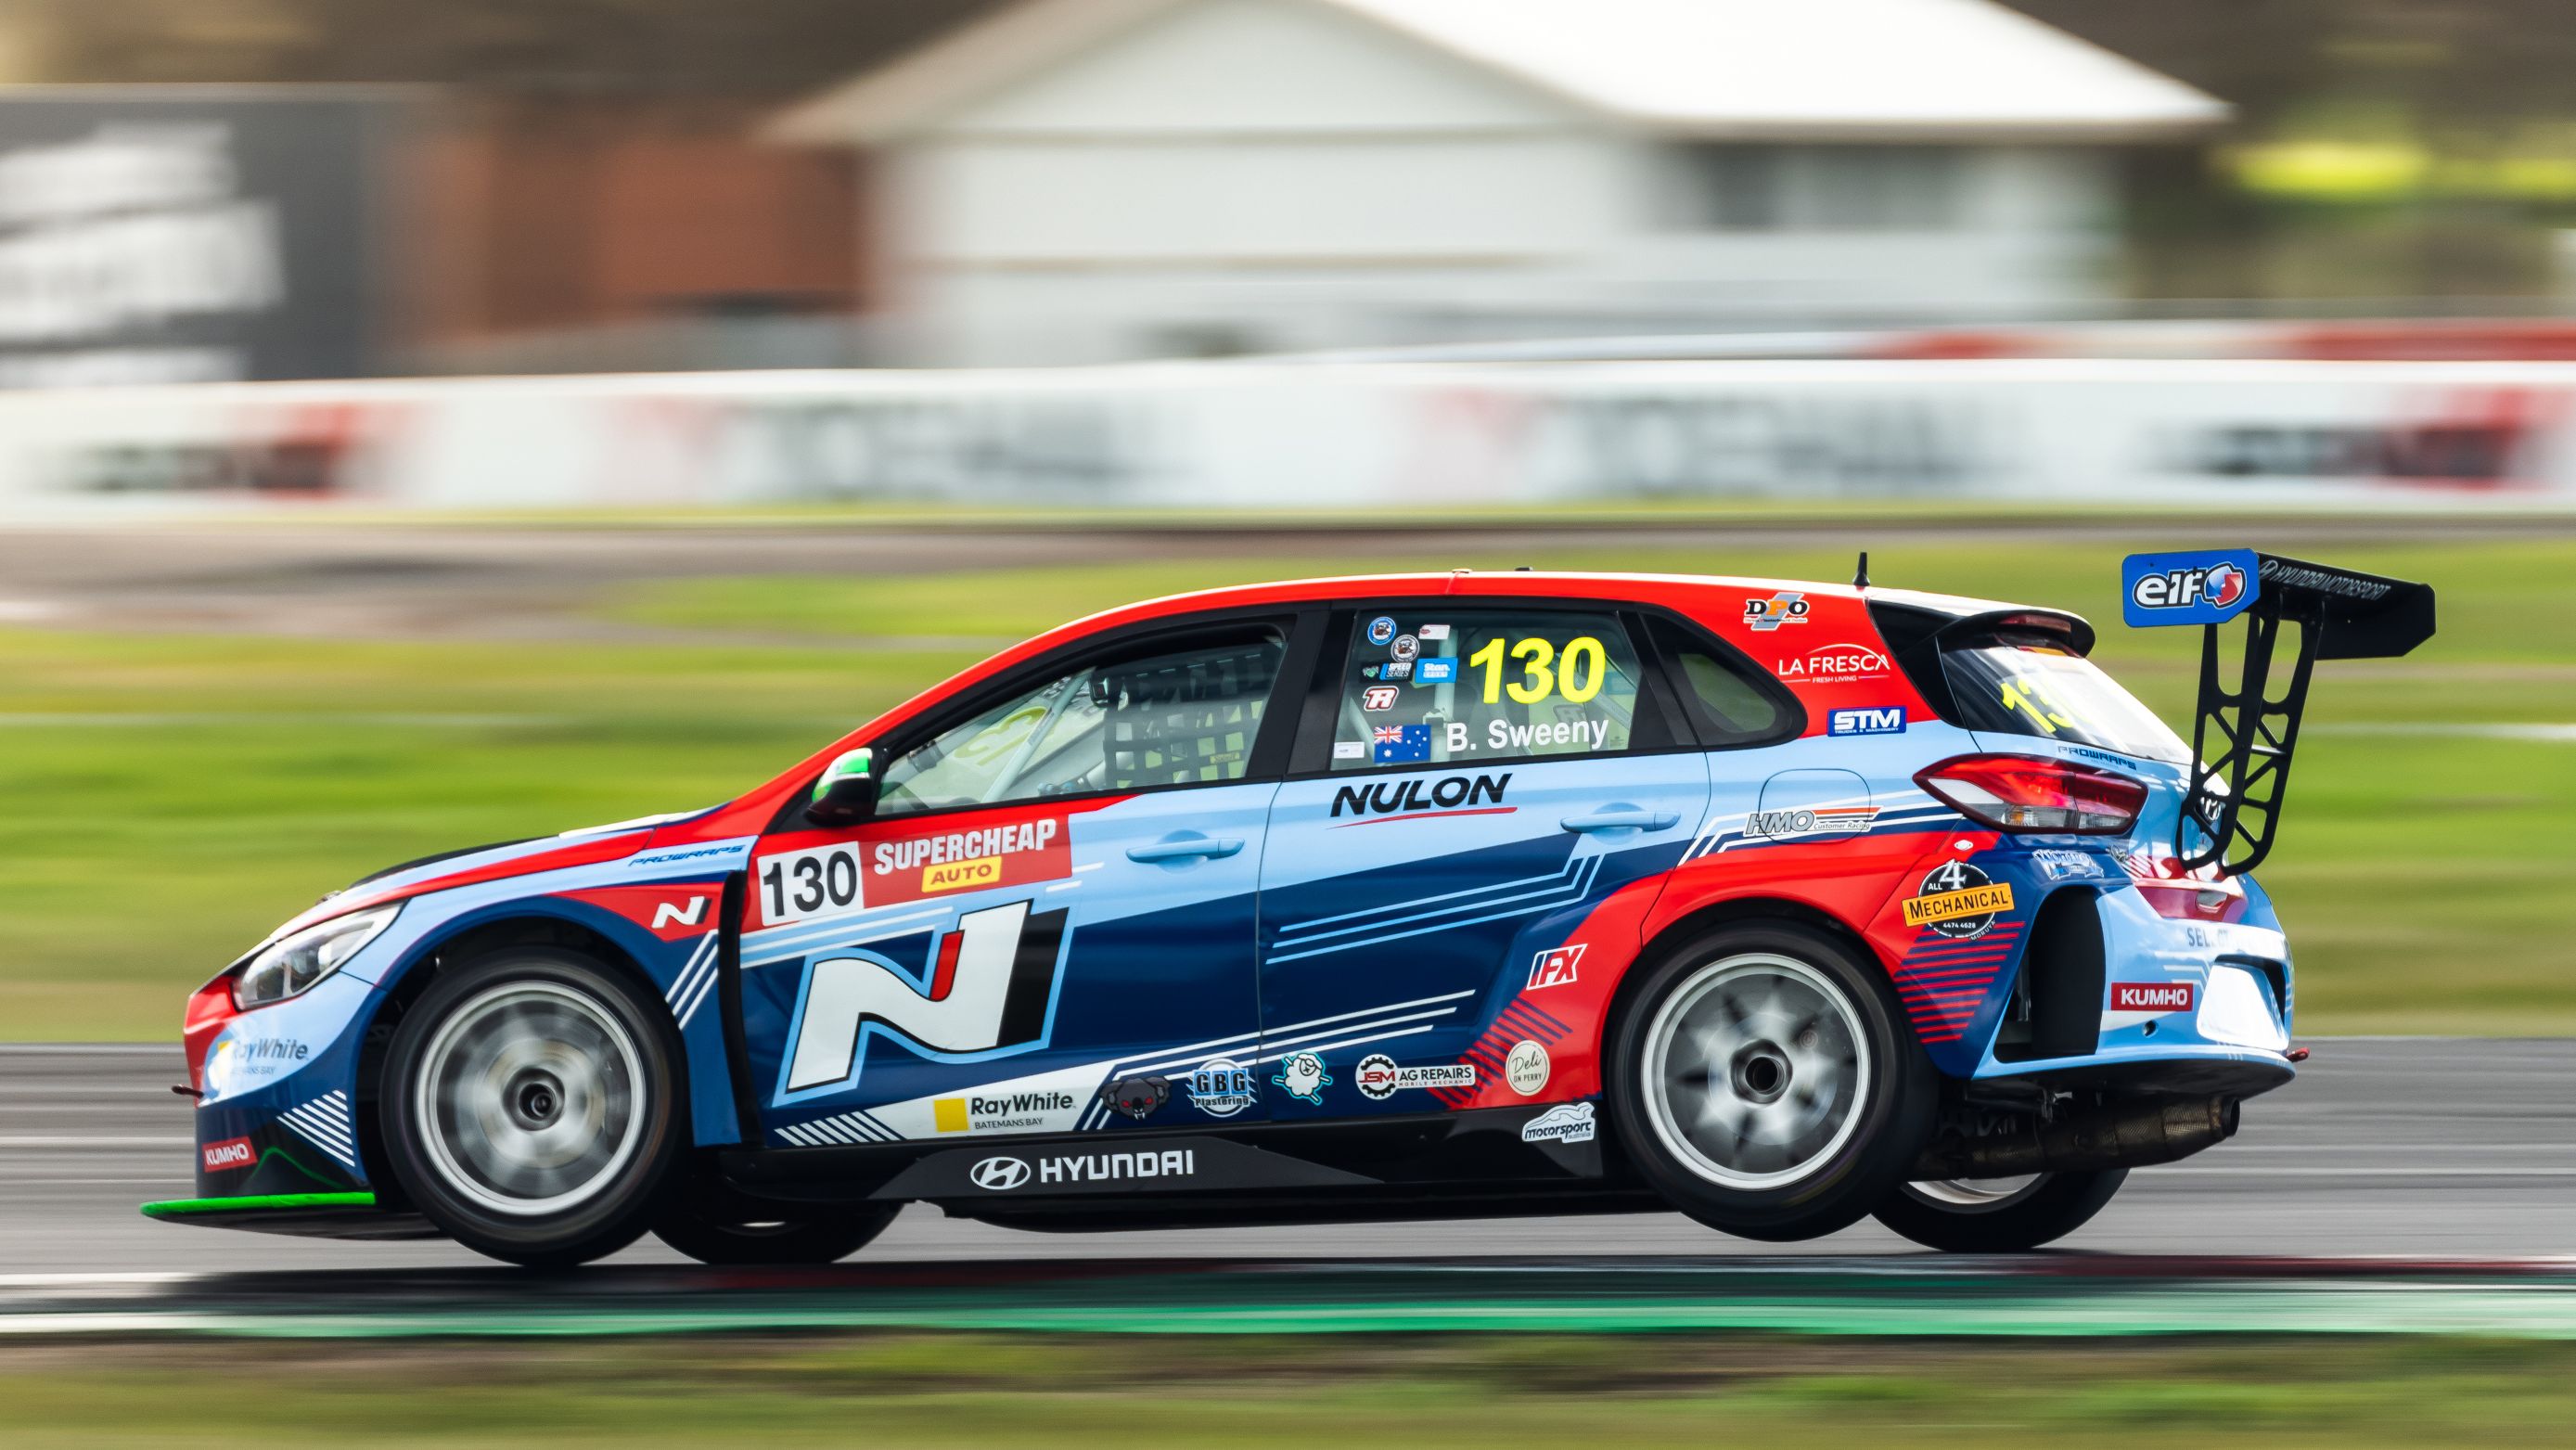 Bailey Sweeny, driver of the No.130, leads the TCR Australia Series after three rounds.